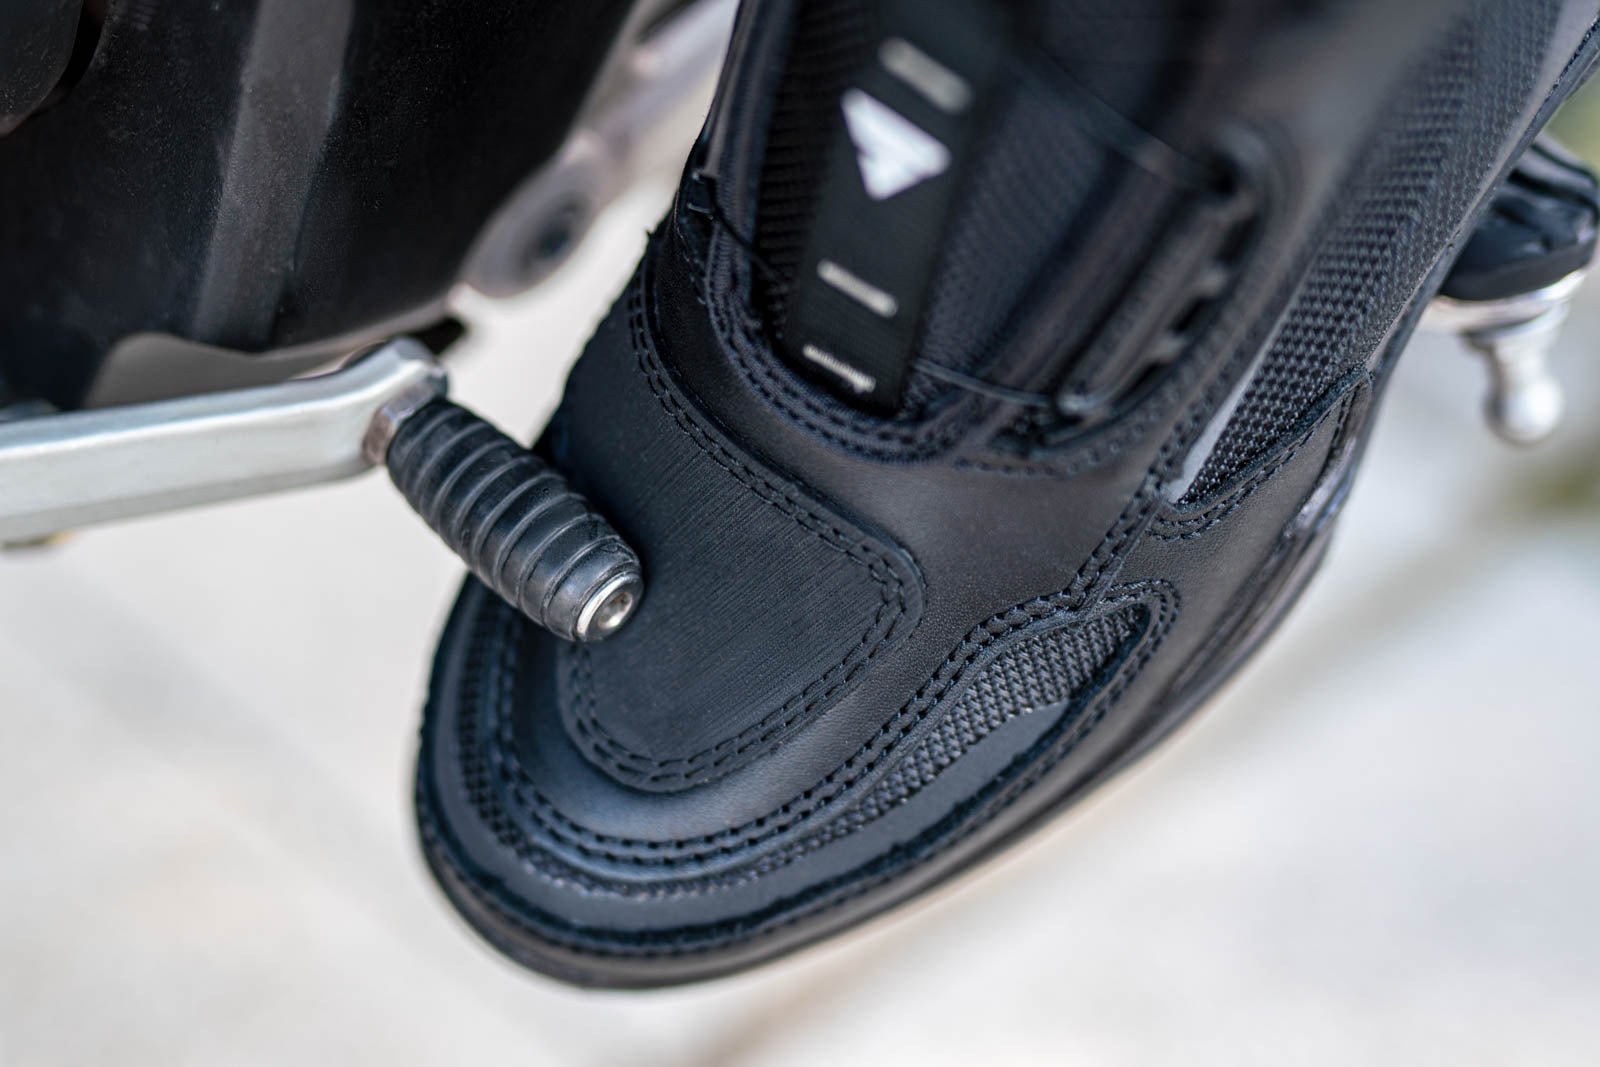 A close up of motorcycle boot changing gears 